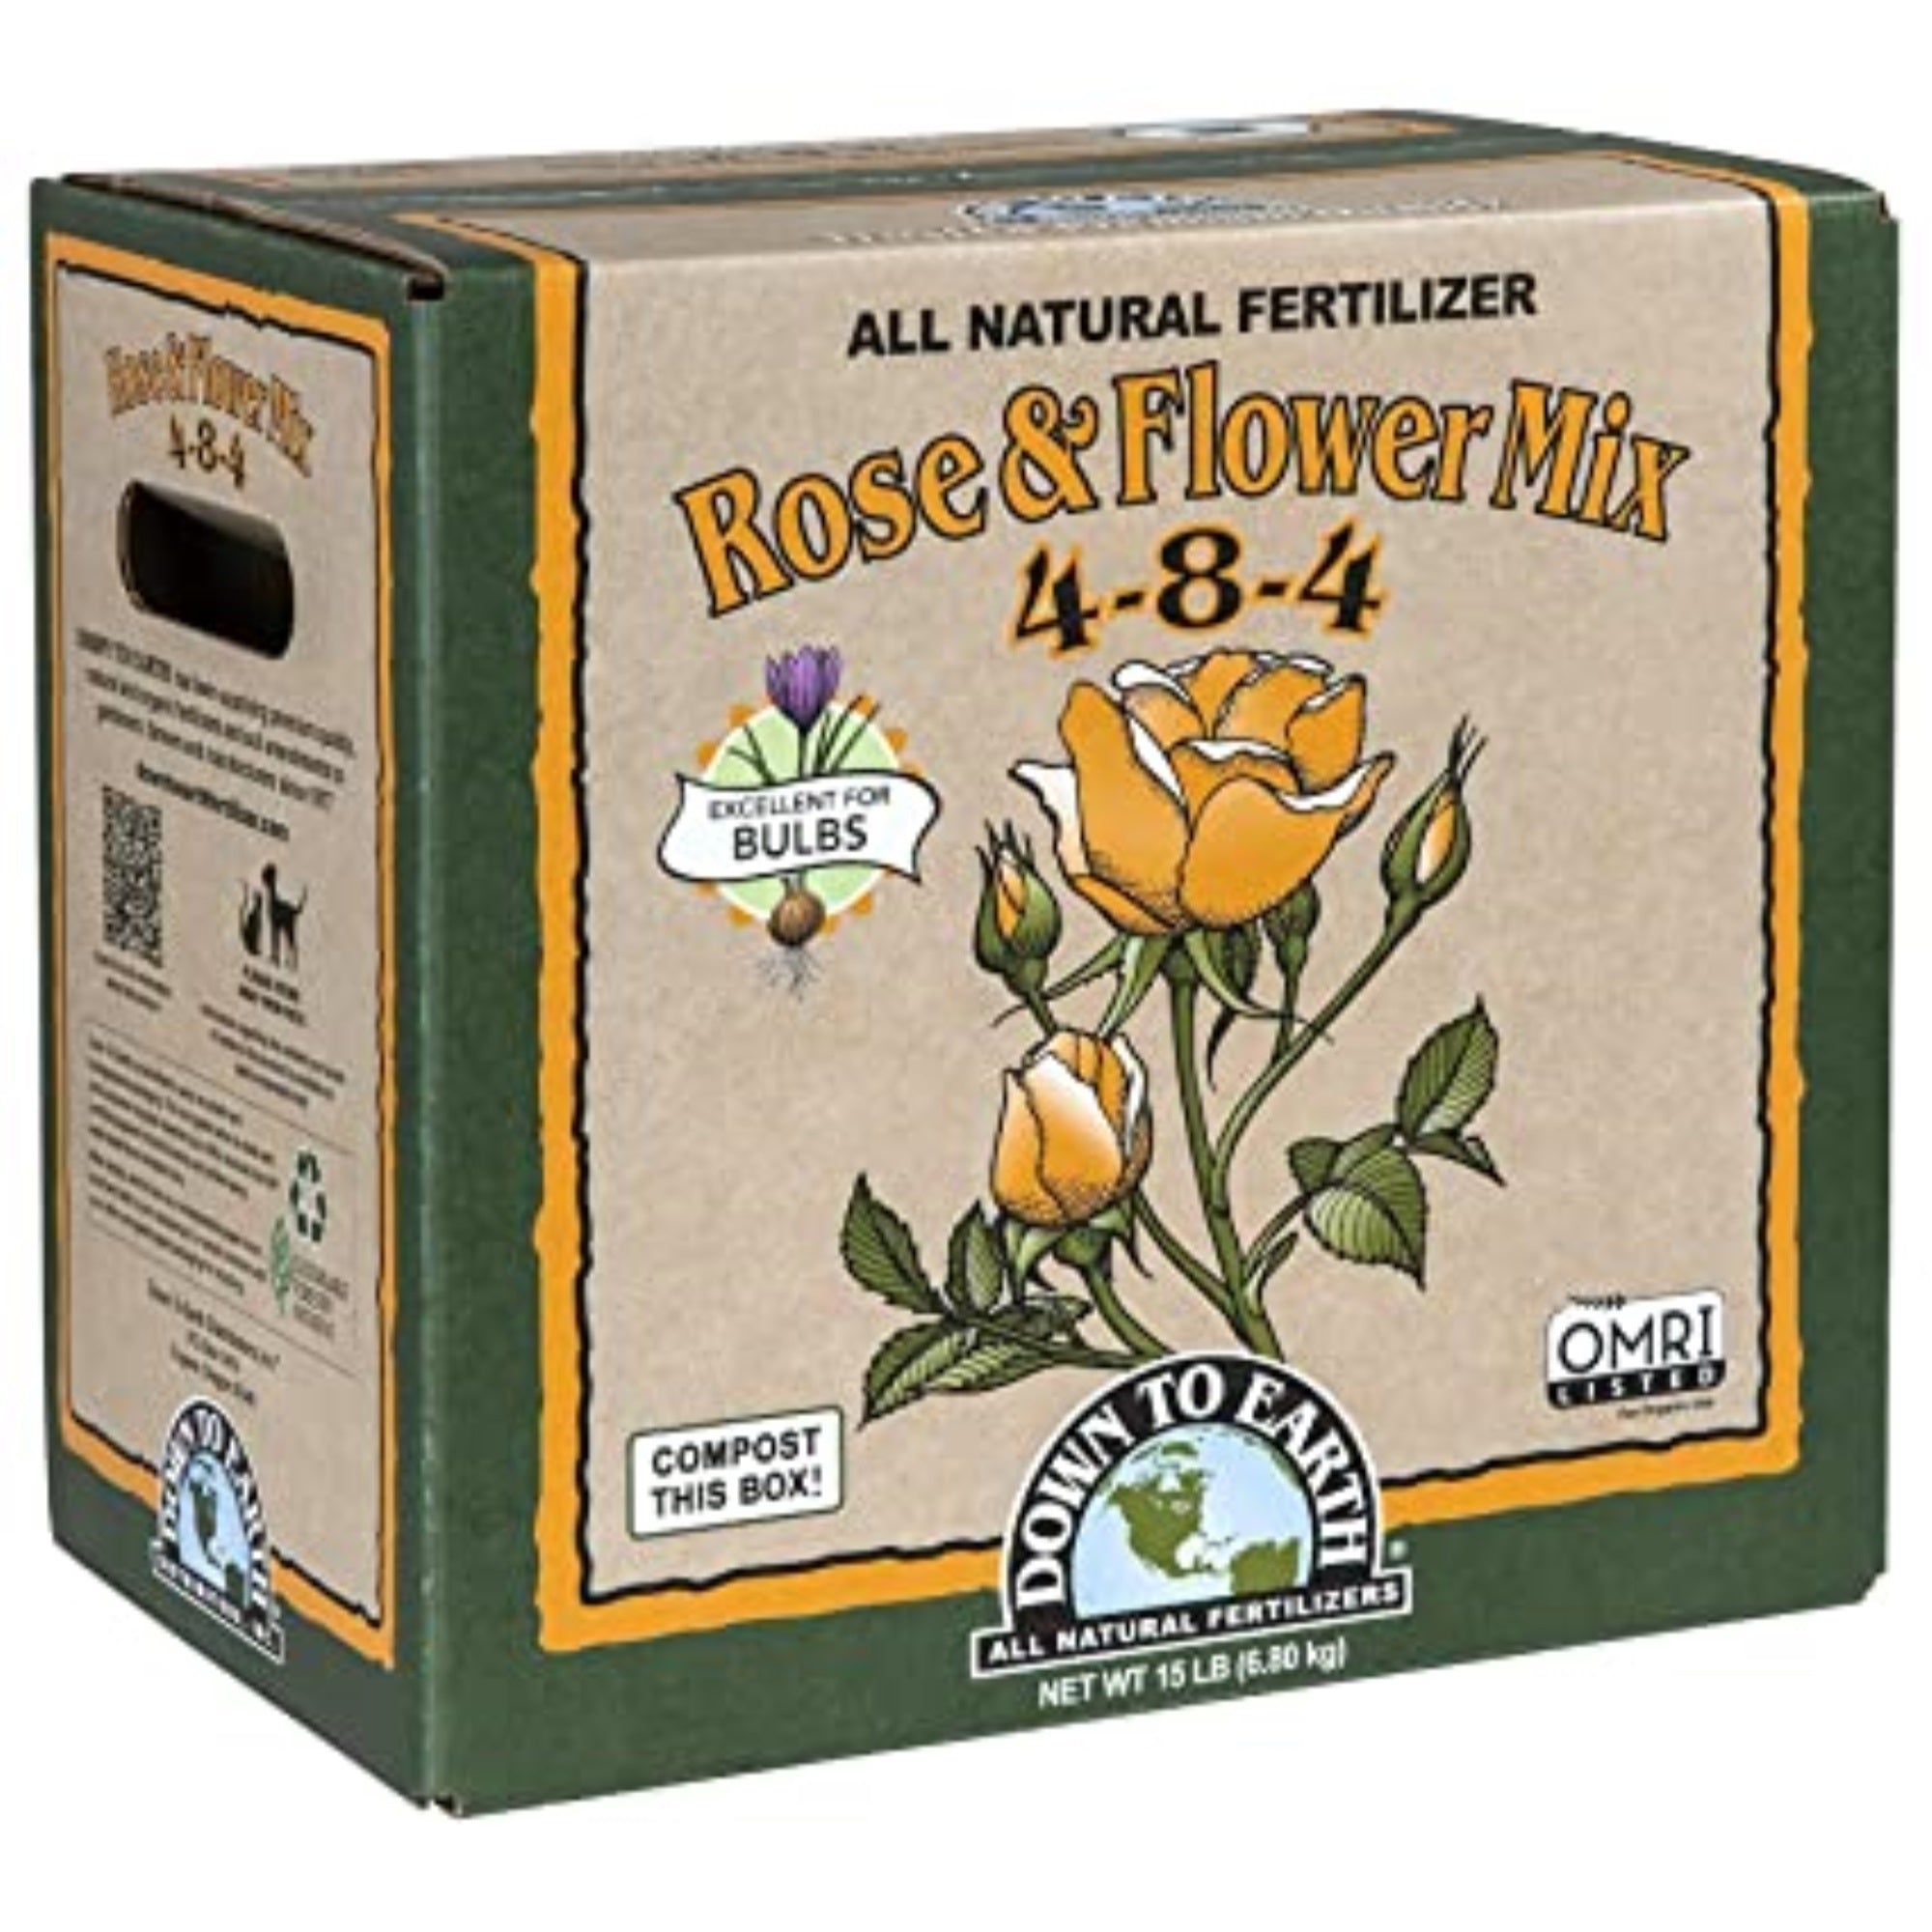 Down To Earth Organic Rose & Flower Fertilizer Mix 4-8-4, 15 lbs